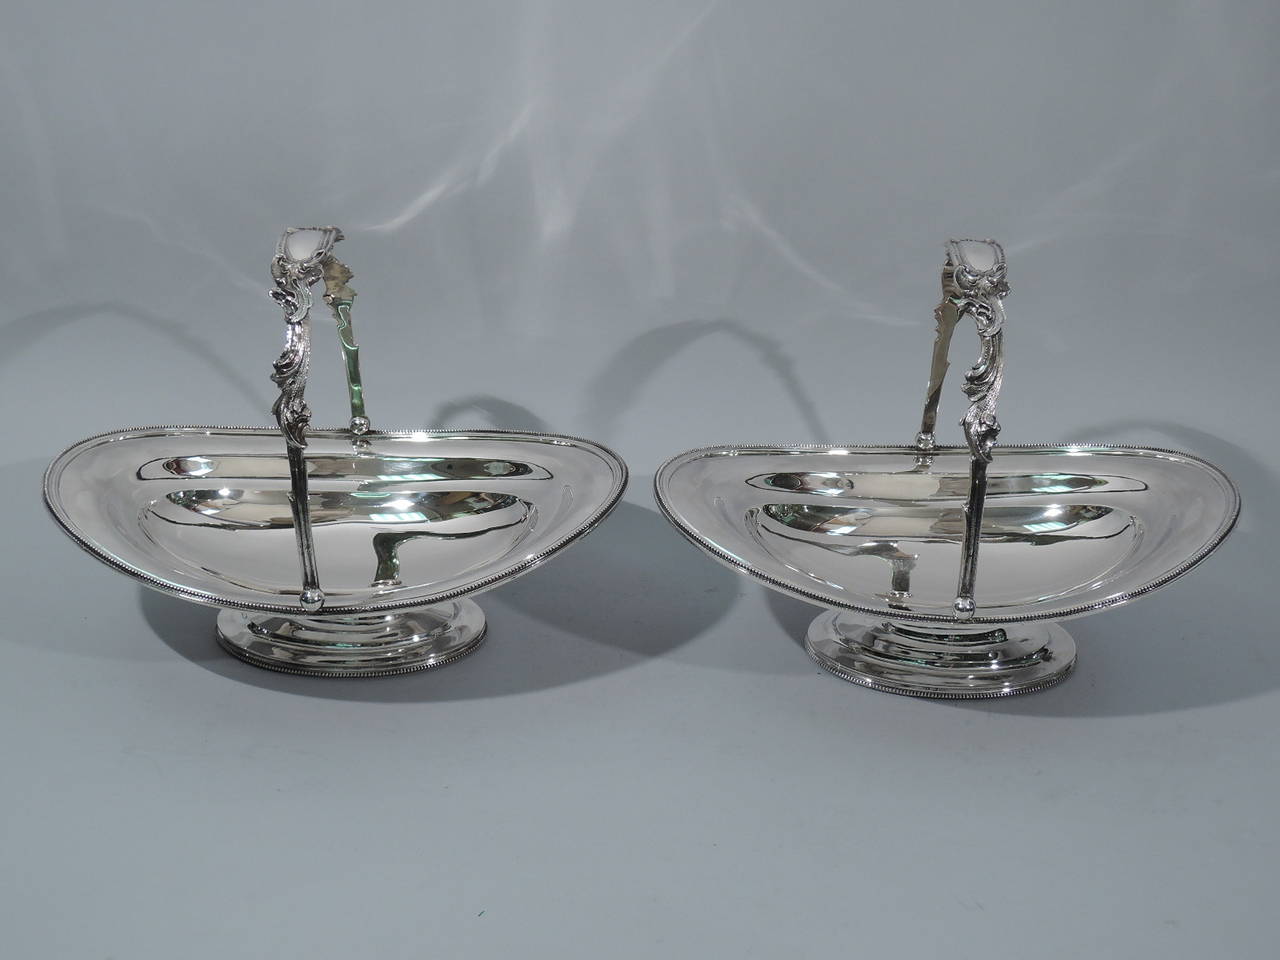 Pair of sterling silver baskets. Retailed by Tiffany & Co. at 550 Broadway, circa 1854-1855. Each shallow and oval bowl on stepped oval foot. Beaded rims. Chased and scrolled swing handle with tubular cartouche (vacant). Rare early Tiffany. Hallmark